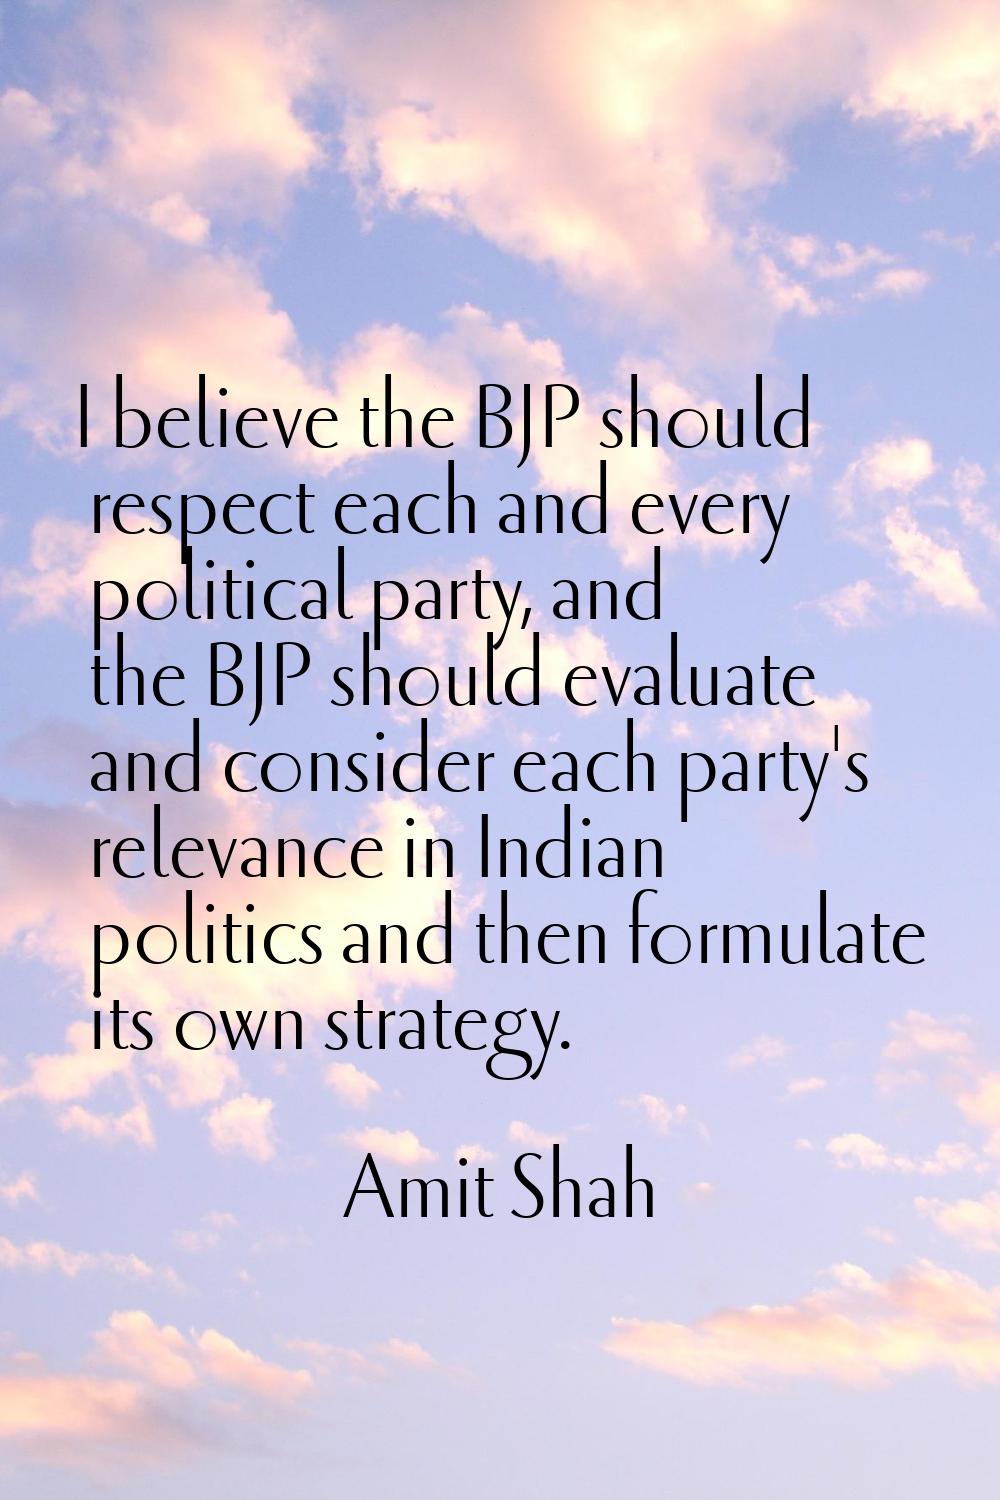 I believe the BJP should respect each and every political party, and the BJP should evaluate and co